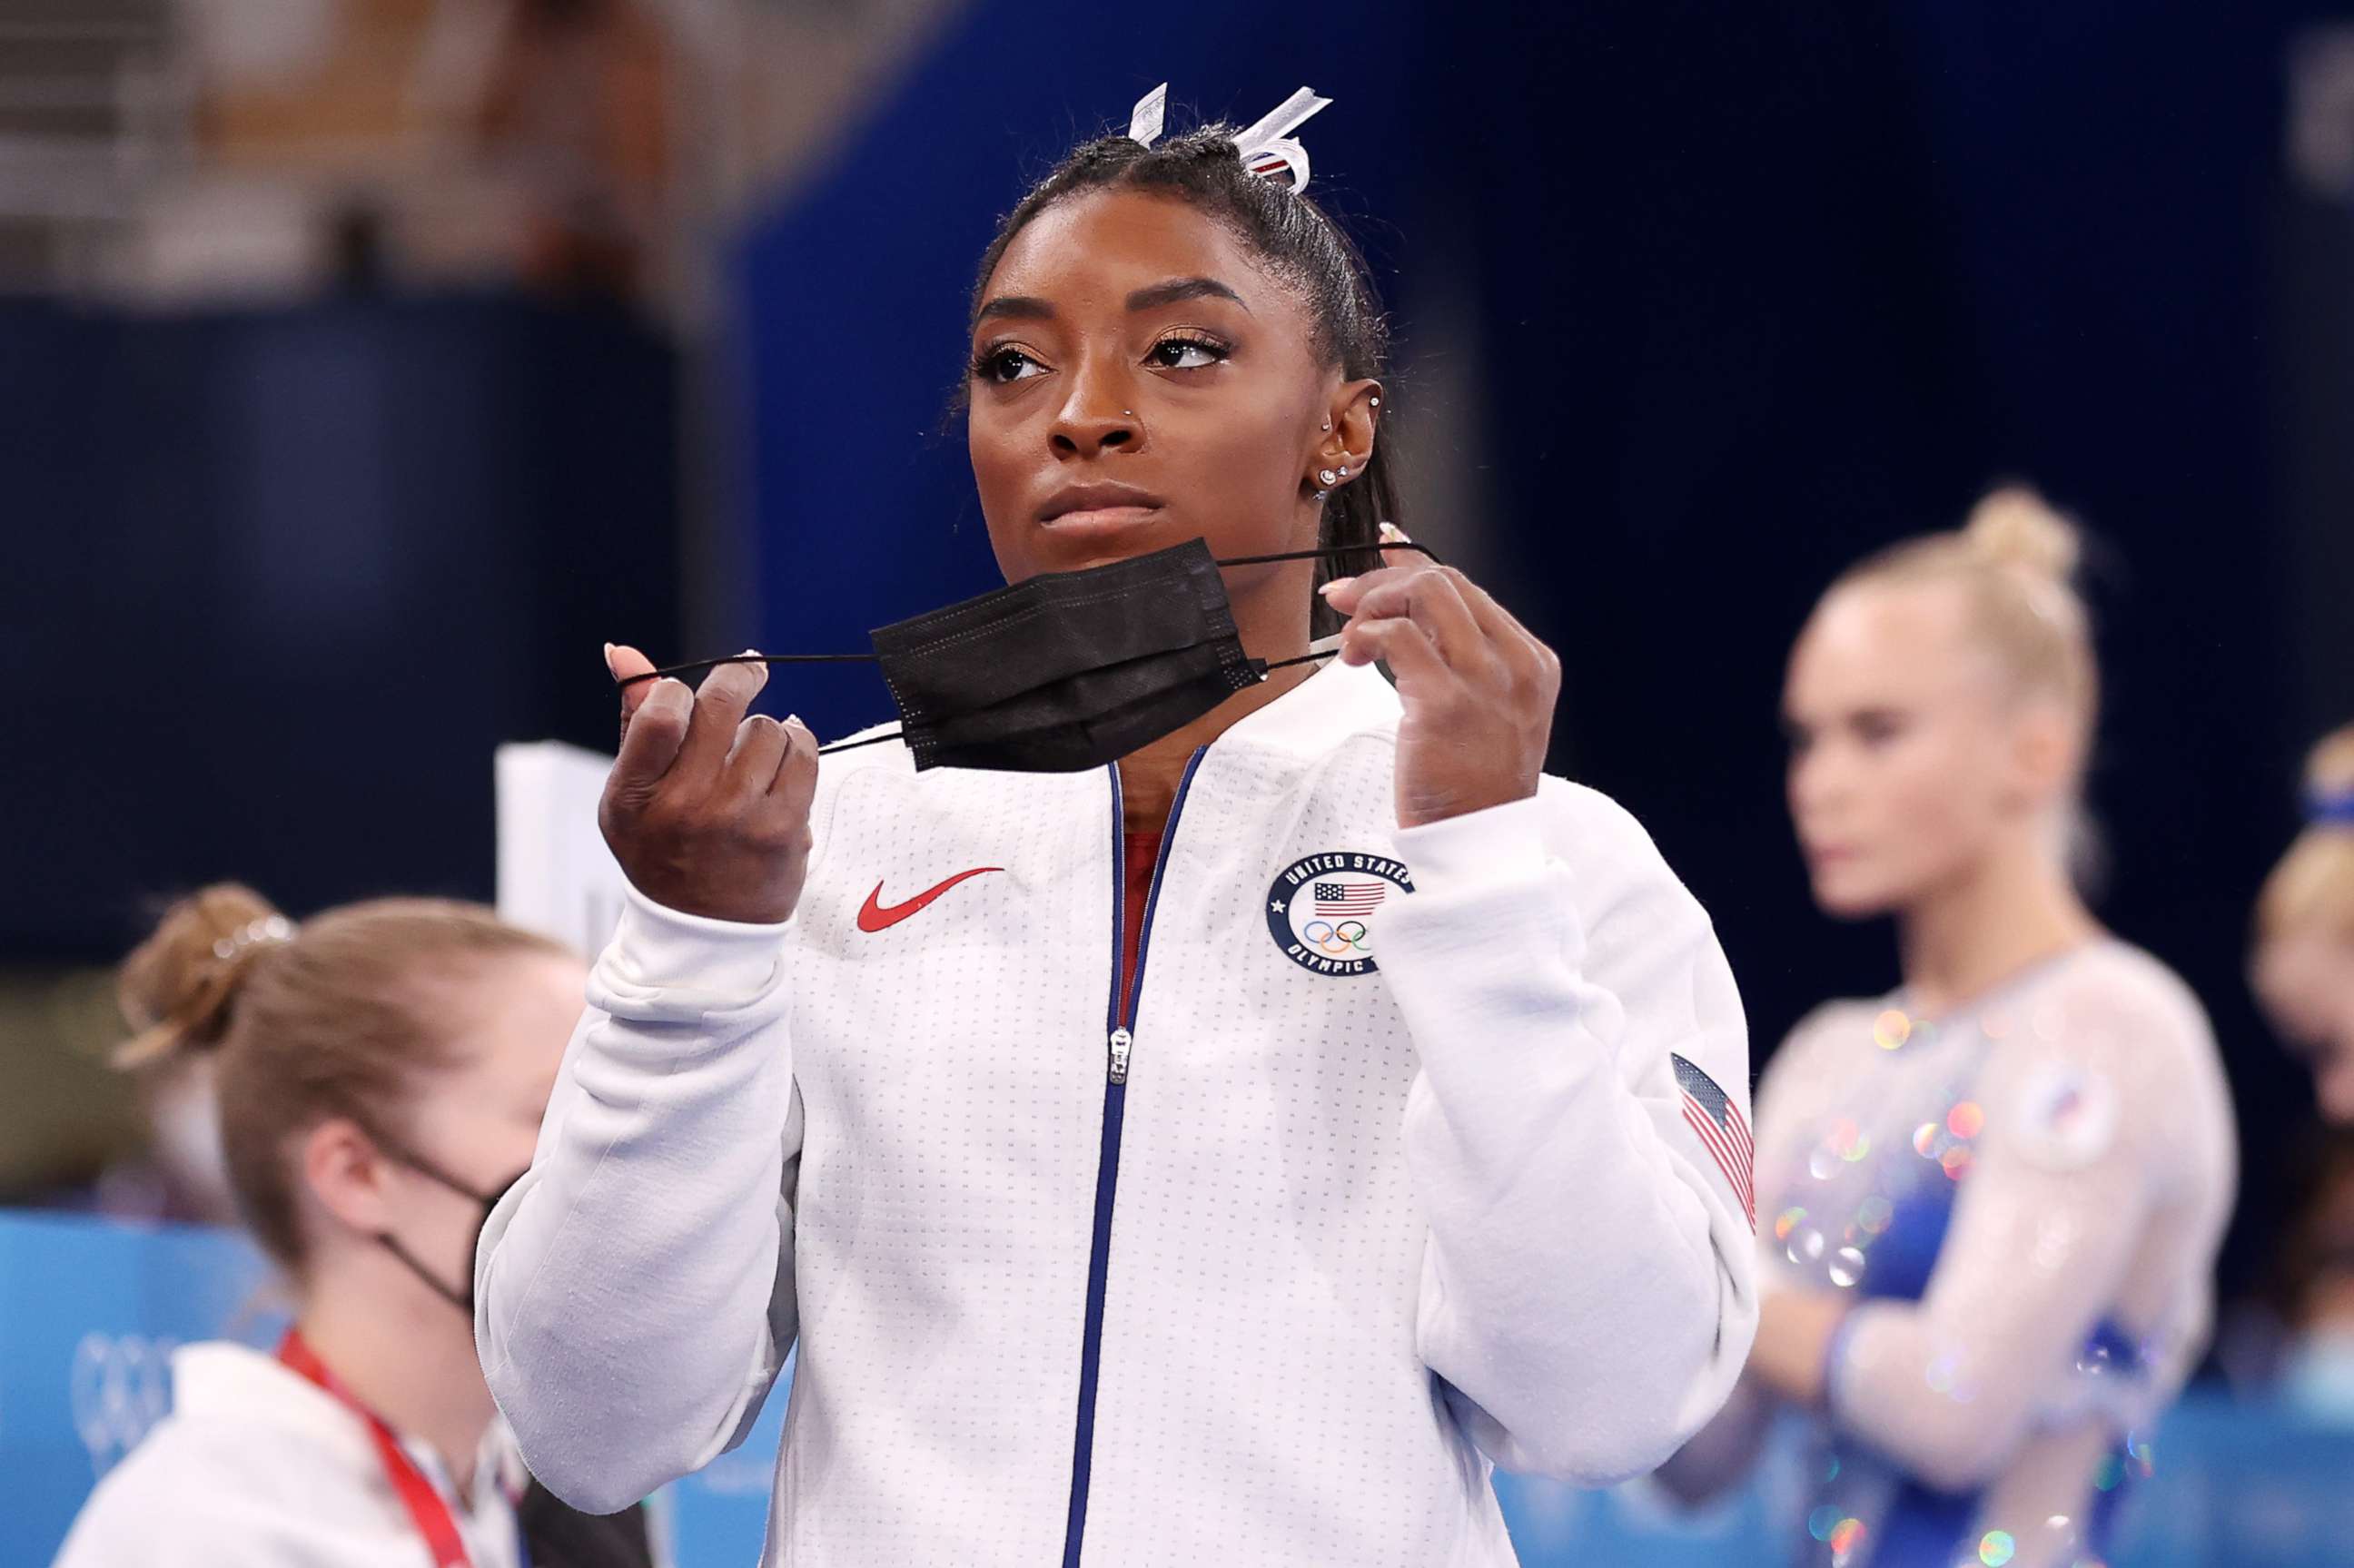 PHOTO: Simone Biles of Team United States looks on during the Women's Team Final on day four of the Tokyo 2020 Olympic Games at Ariake Gymnastics Centre on July 27, 2021 in Tokyo, Japan.